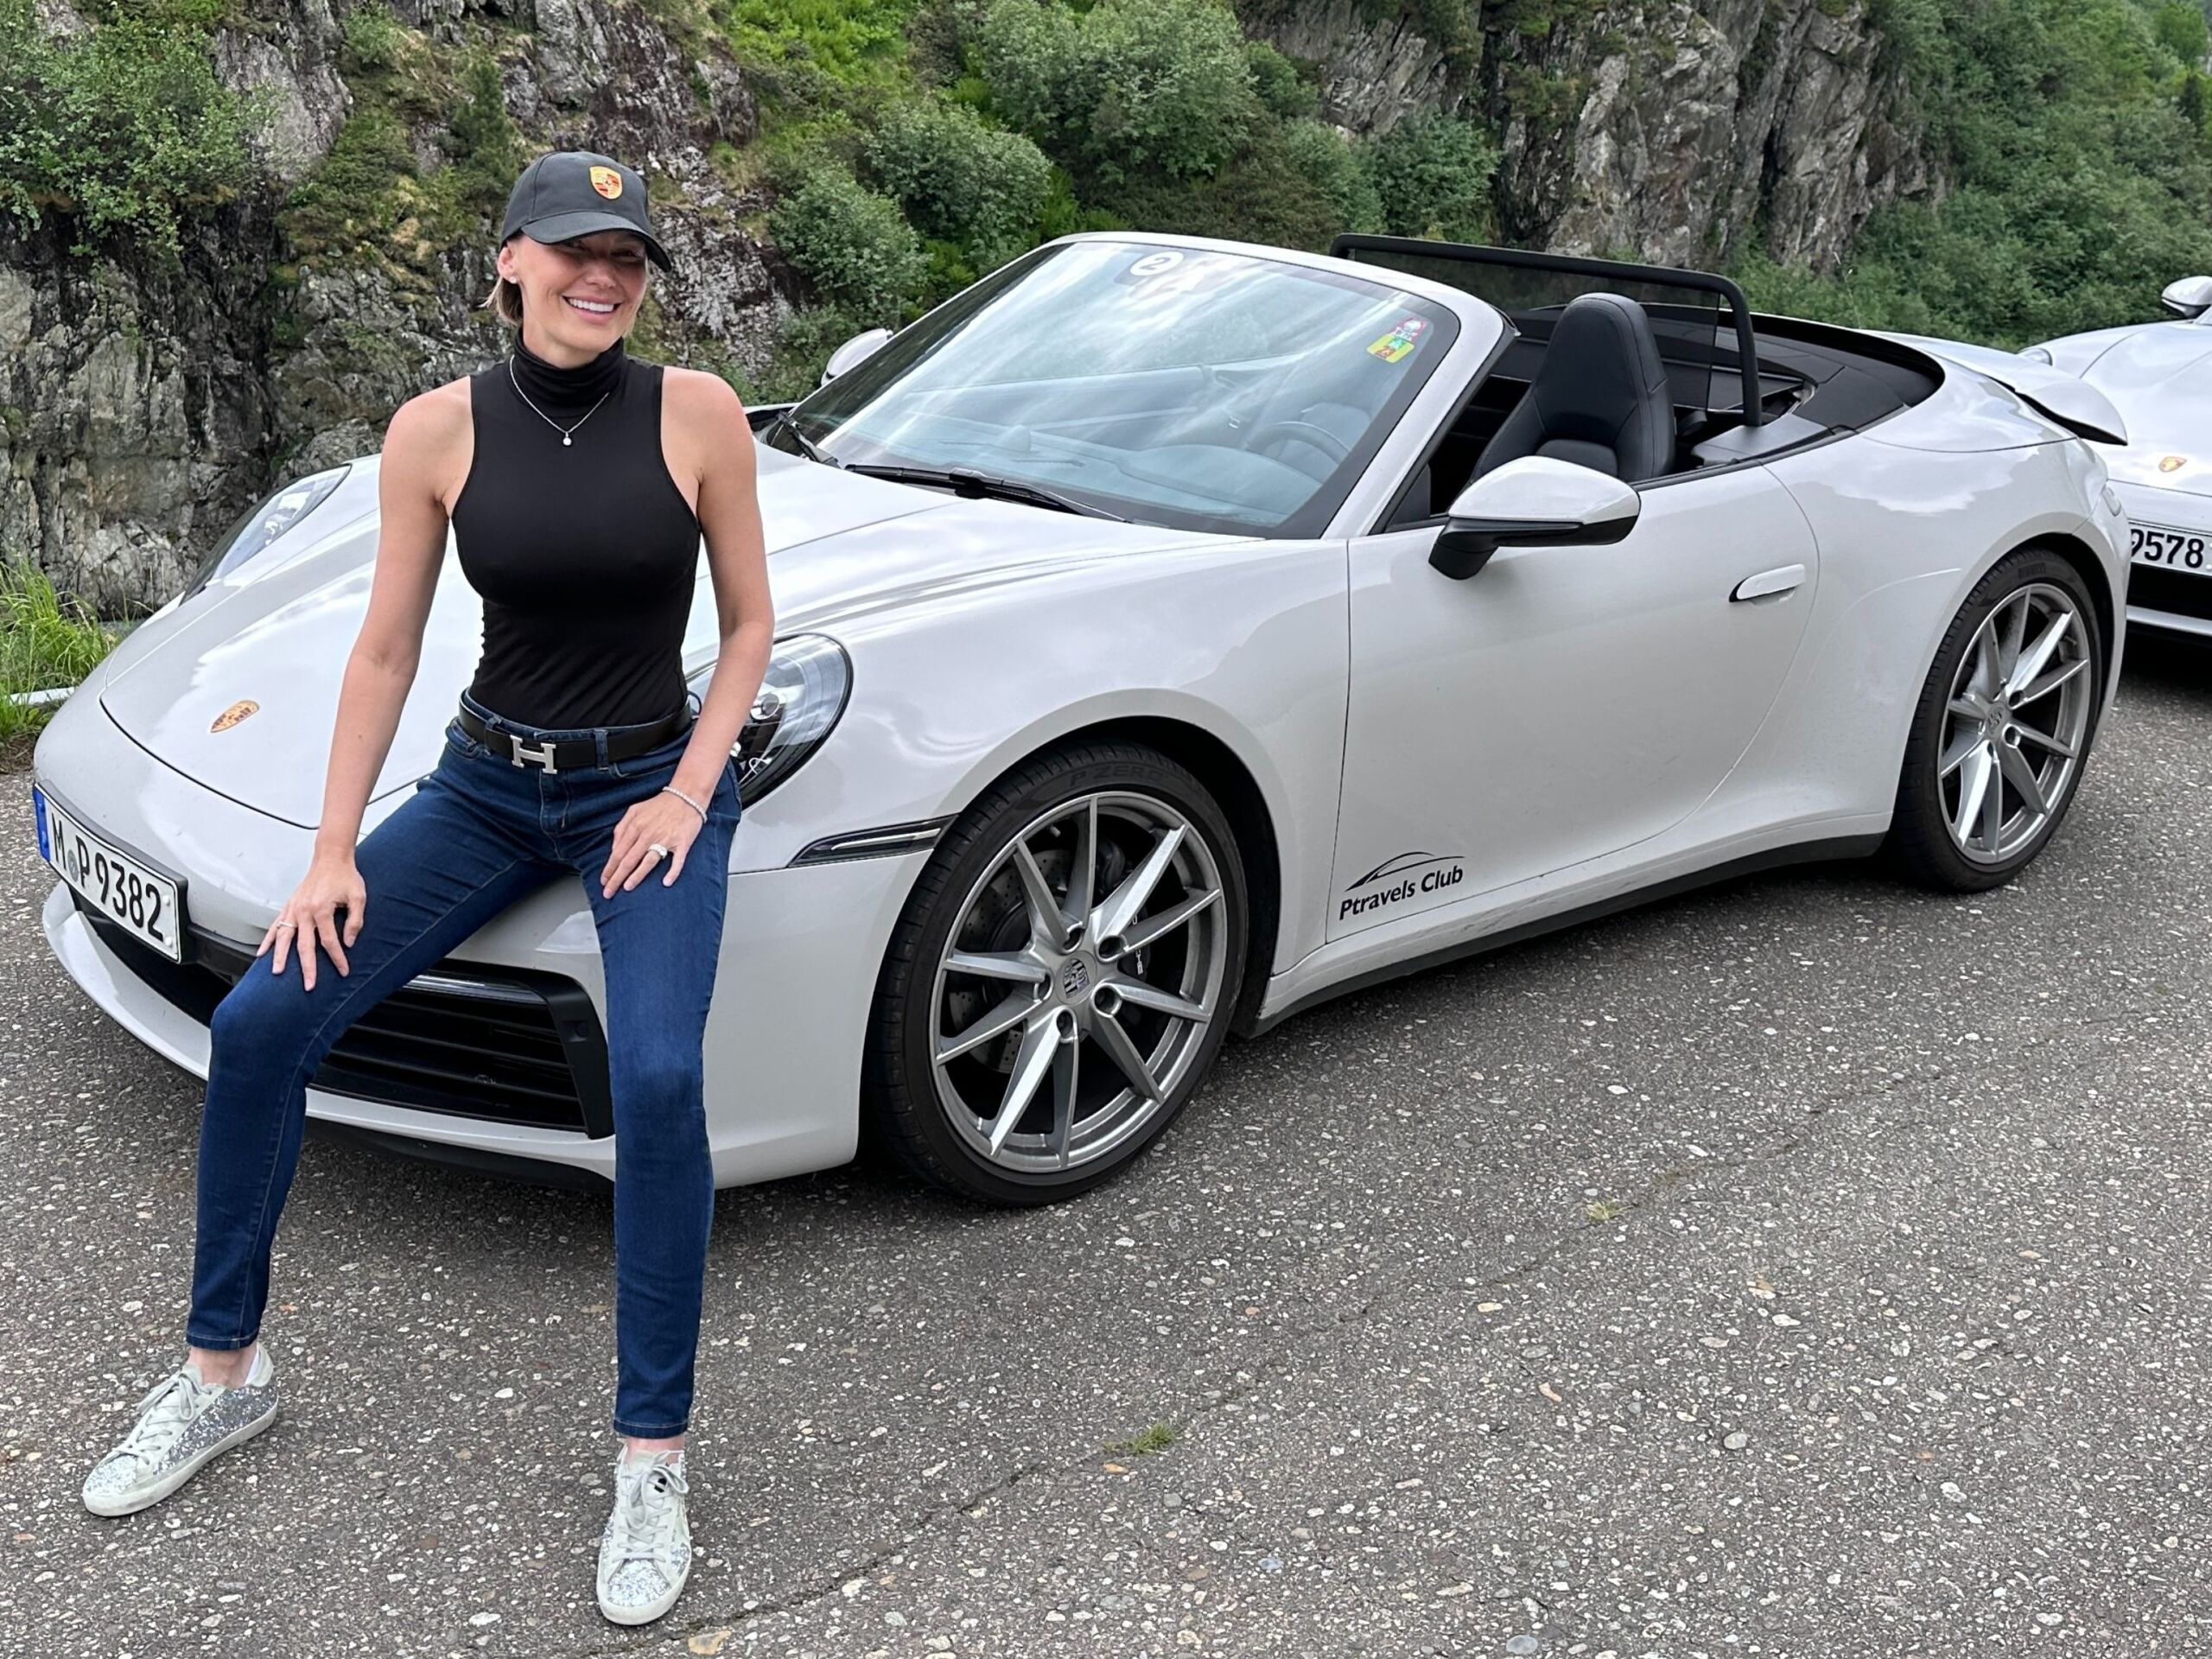 Driving a Porsche across 4 countries in Europe